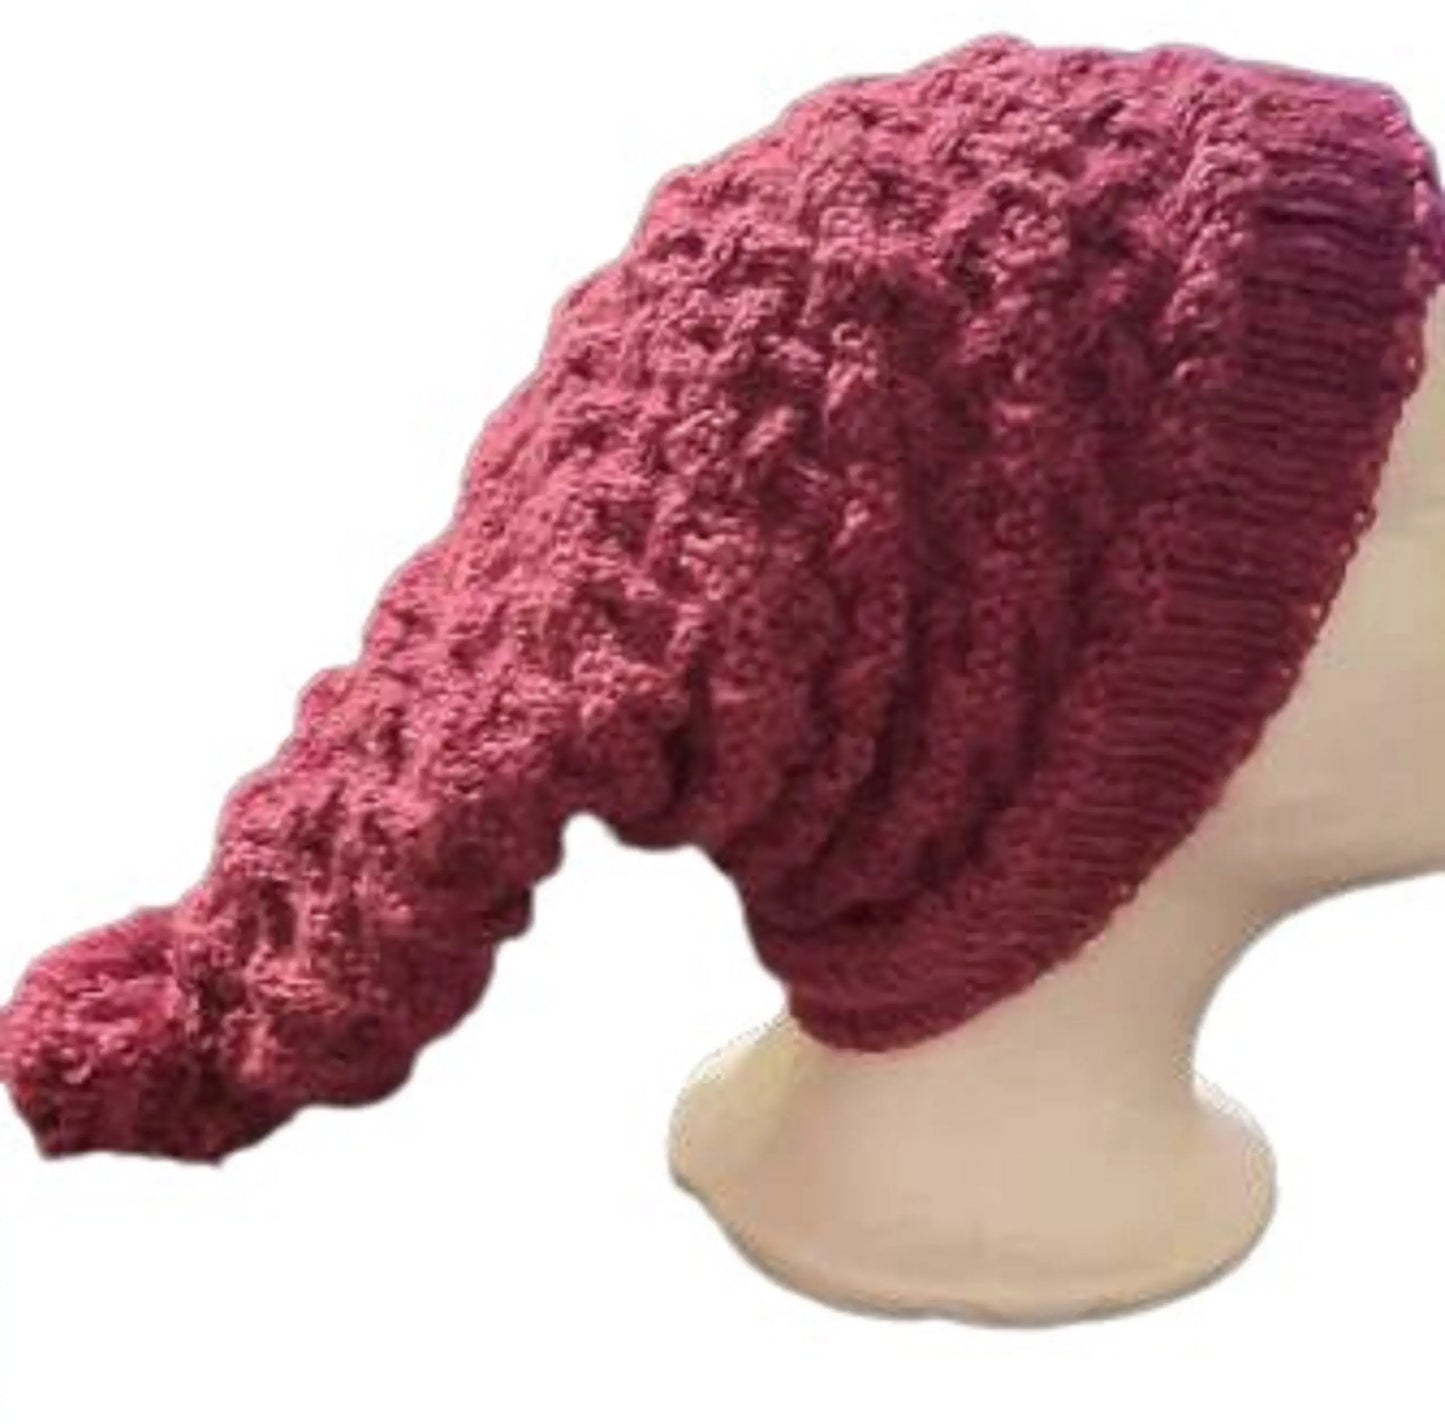 "Enchanting Burgundy Pixie Hat: Hand Knitted Delight for Your Adventurous Spirit" - Image #3